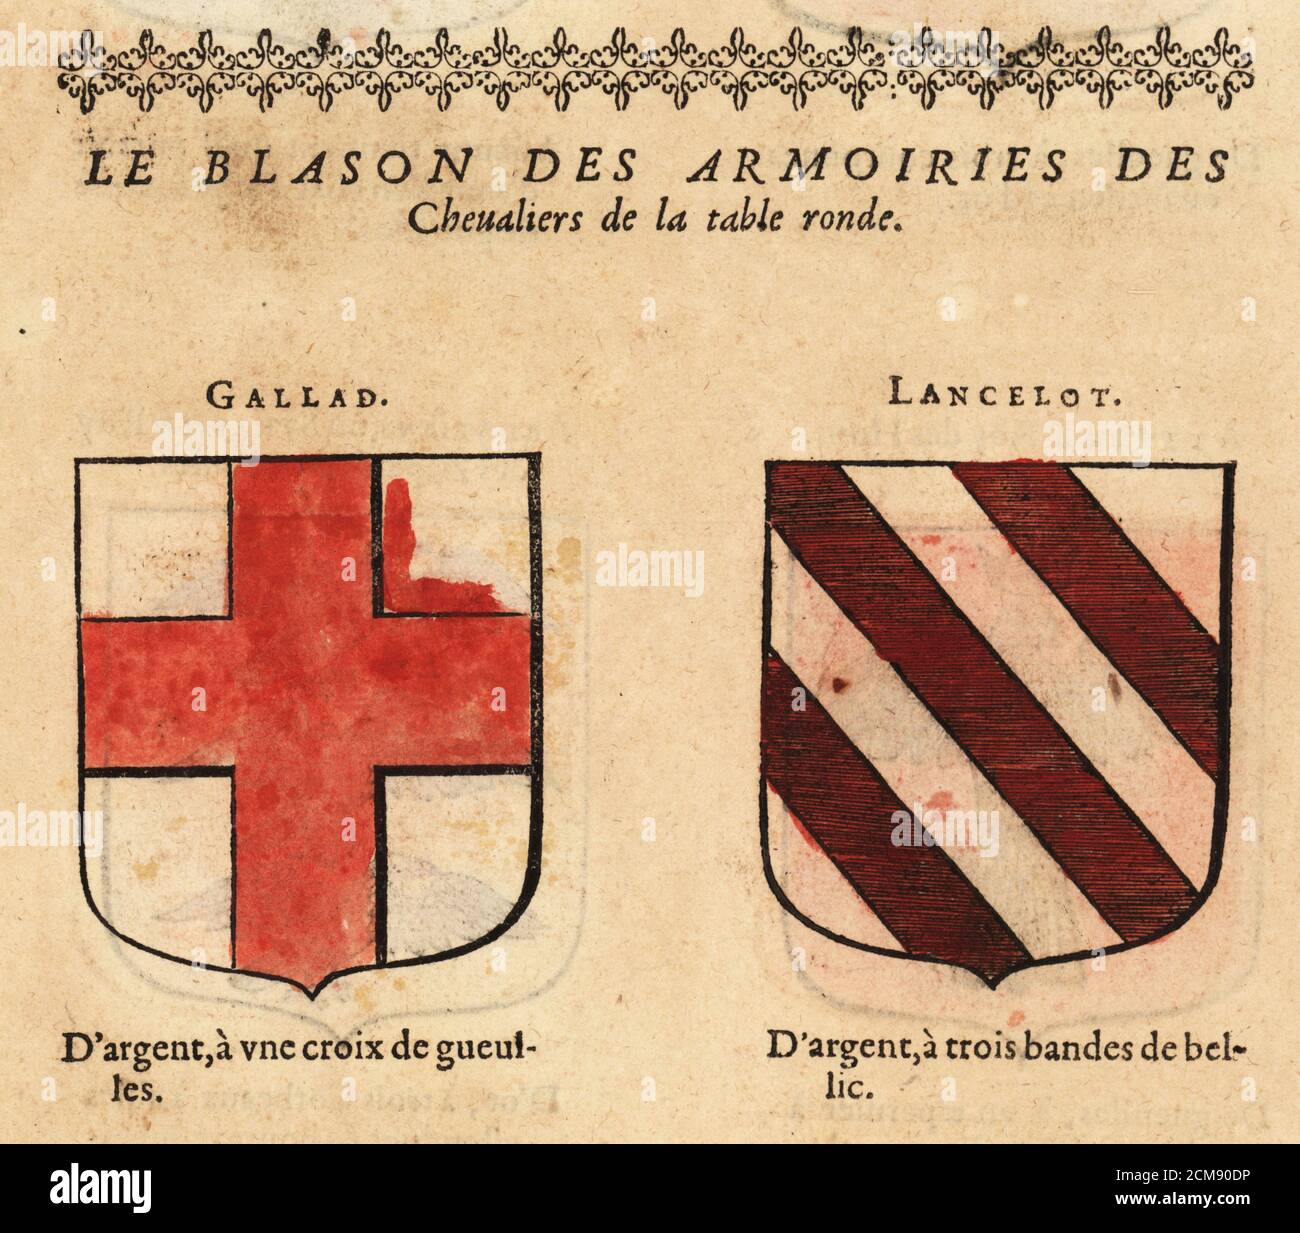 Coats of arms of King Arthur’s Knights of the Round Table: Sir Galahad, with red cross, and Sir Lancelot du Lac, with three crimson bands. Chevaliers de la table rone: GALLAD, LANCELOT. Handcoloured woodblock engraving from Hierosme de Bara’s Le Blason des Armoiries, Chez Rolet Boutonne, Paris, 1628 Stock Photo